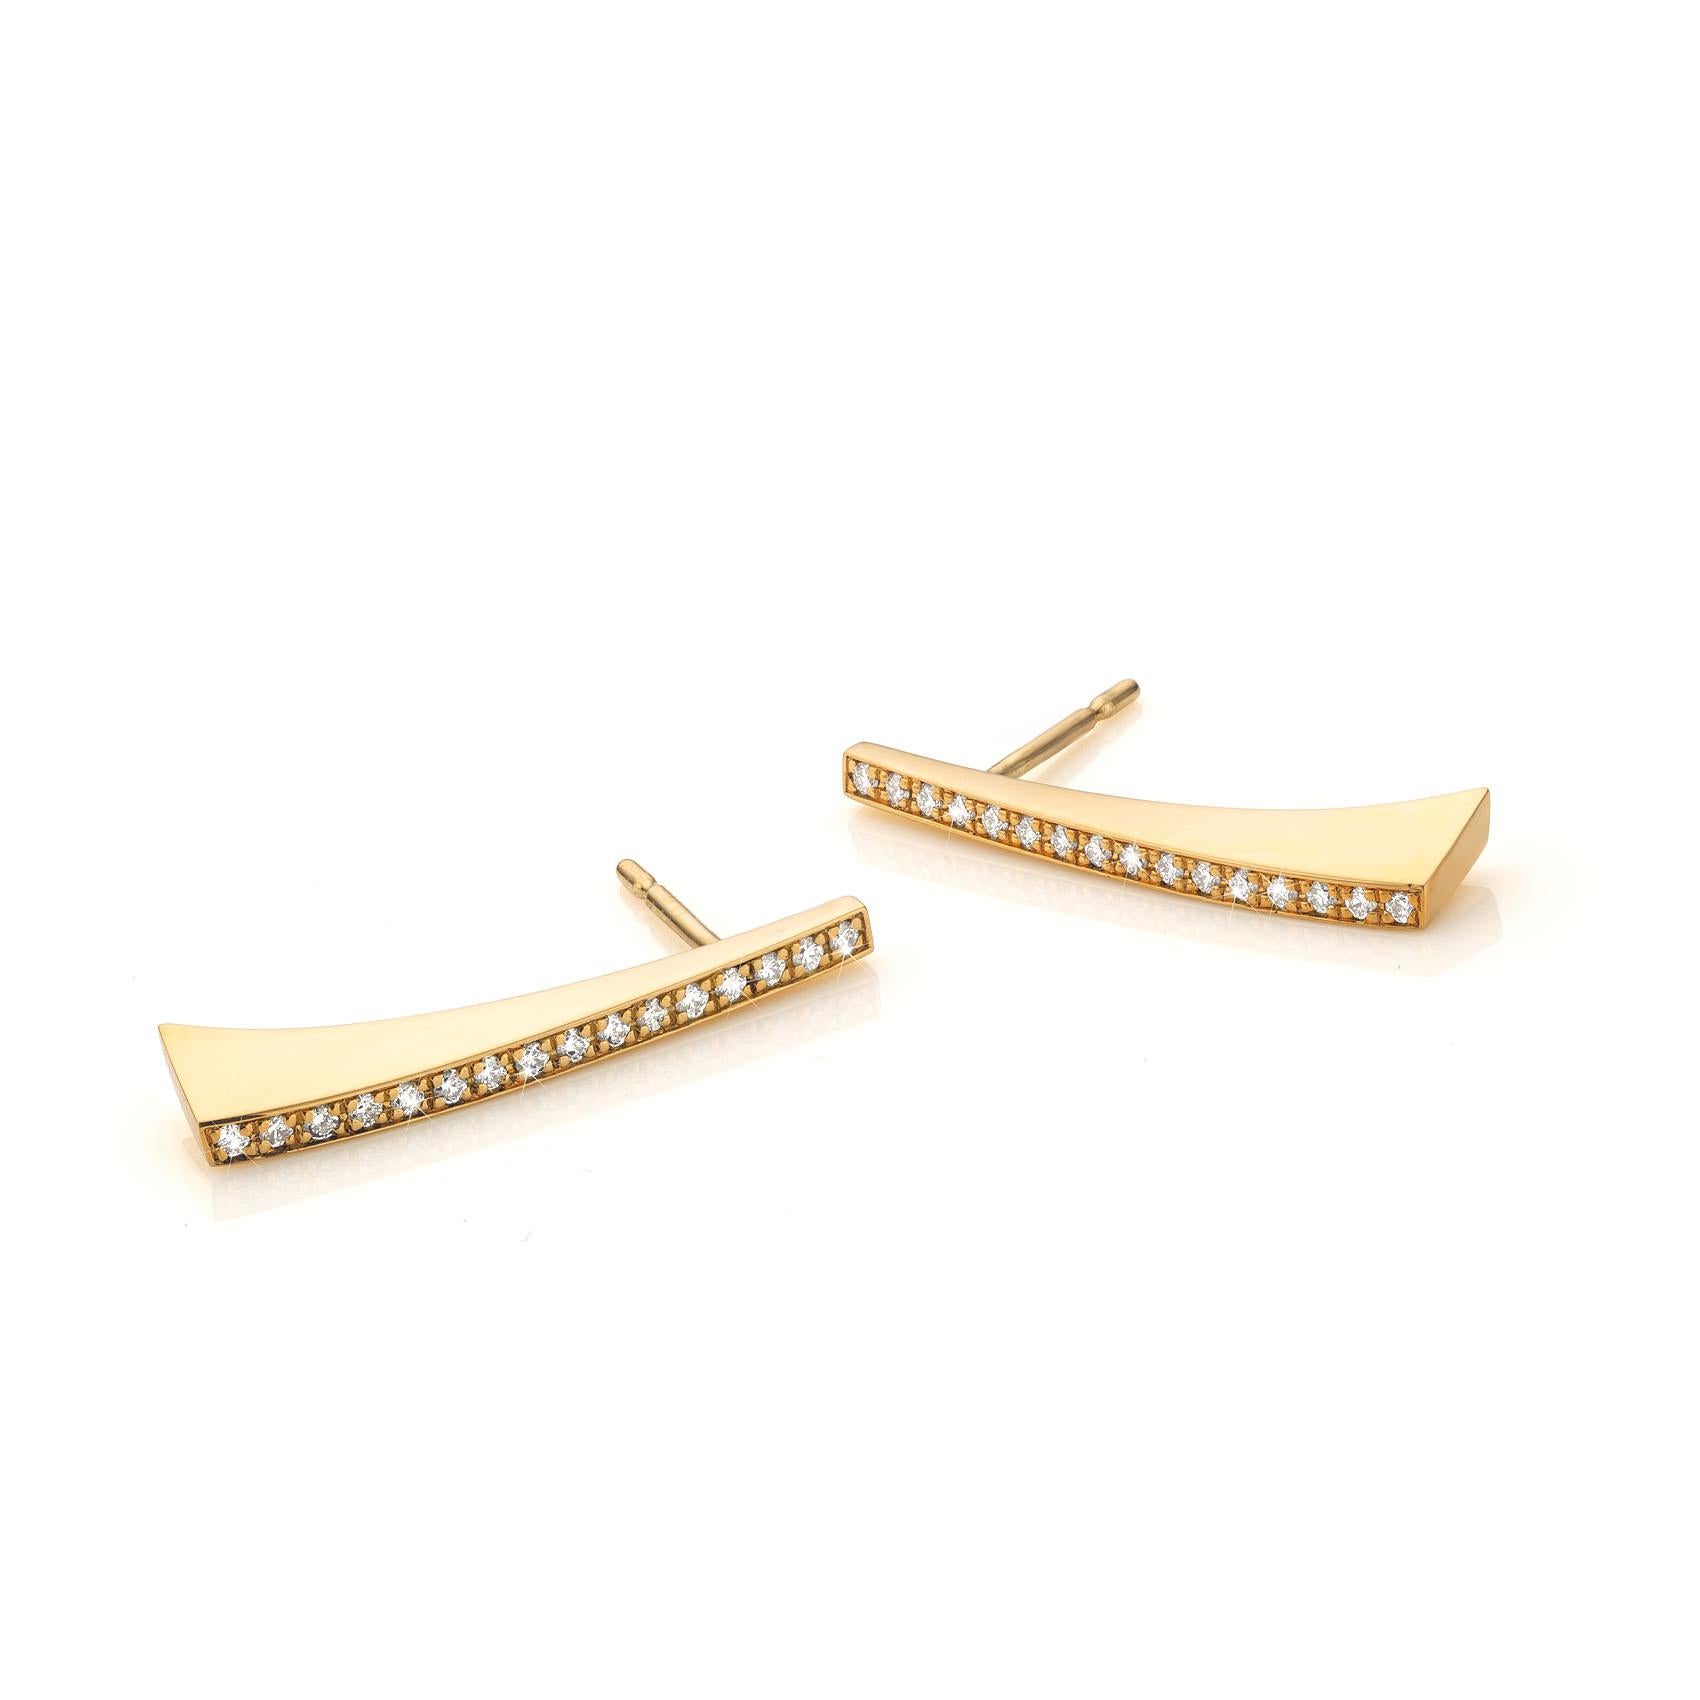 Contemporary Cober total 32 brilliant-cut Diamonds of 0.01 Carat Yellow Gold Design Earrings For Sale